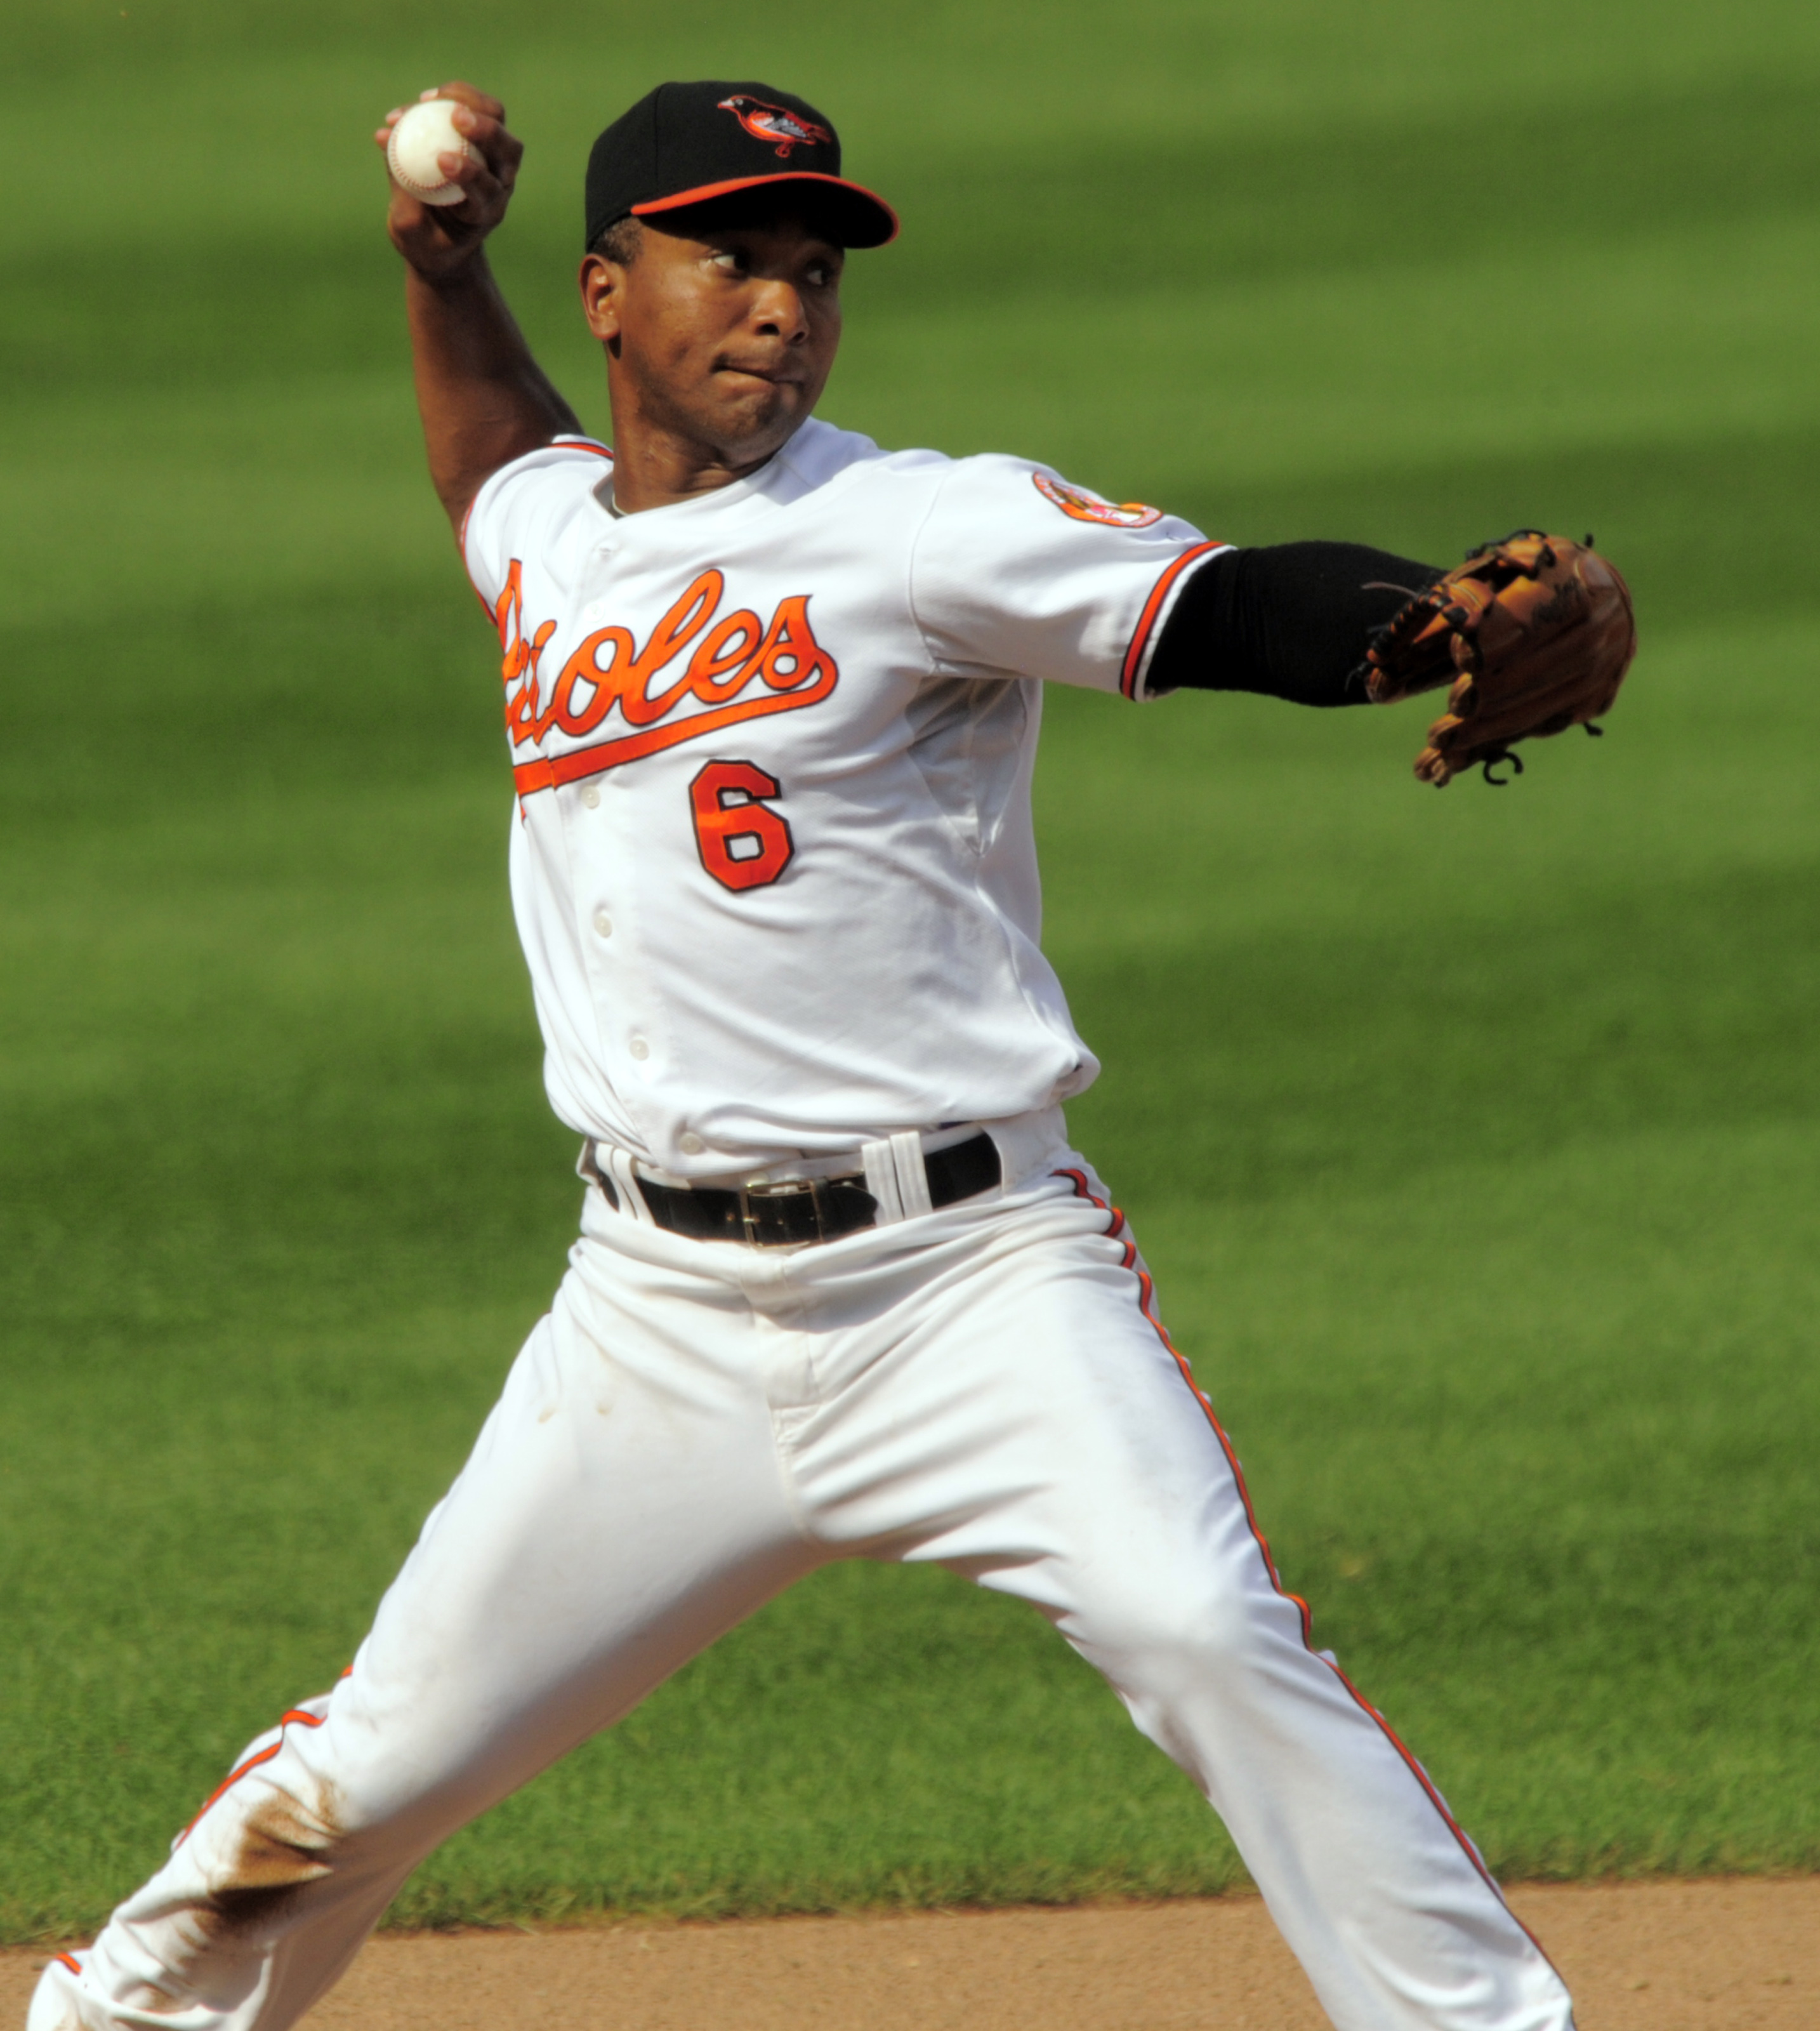 BALTIMORE, MD -- 09/06/2009 -- Baltimore Orioles third baseman Melvin Mora (6) at Oriole Park at Camden Yards Sunday, Sep. 6, 2009. Starting pitcher Jeremy Guthrie went 7 innings, allowing 6 hits and striking out 6, without yielding any runs as the Orioles white-washed the Rangers, 7-0. (Karl Merton Ferron / Baltimore Sun Staff) (_DSC0627.JPG) (full slug: SP BBA RANGERS ORIOLES: Xref no: 00064720A) ORG XMIT: 00064720A